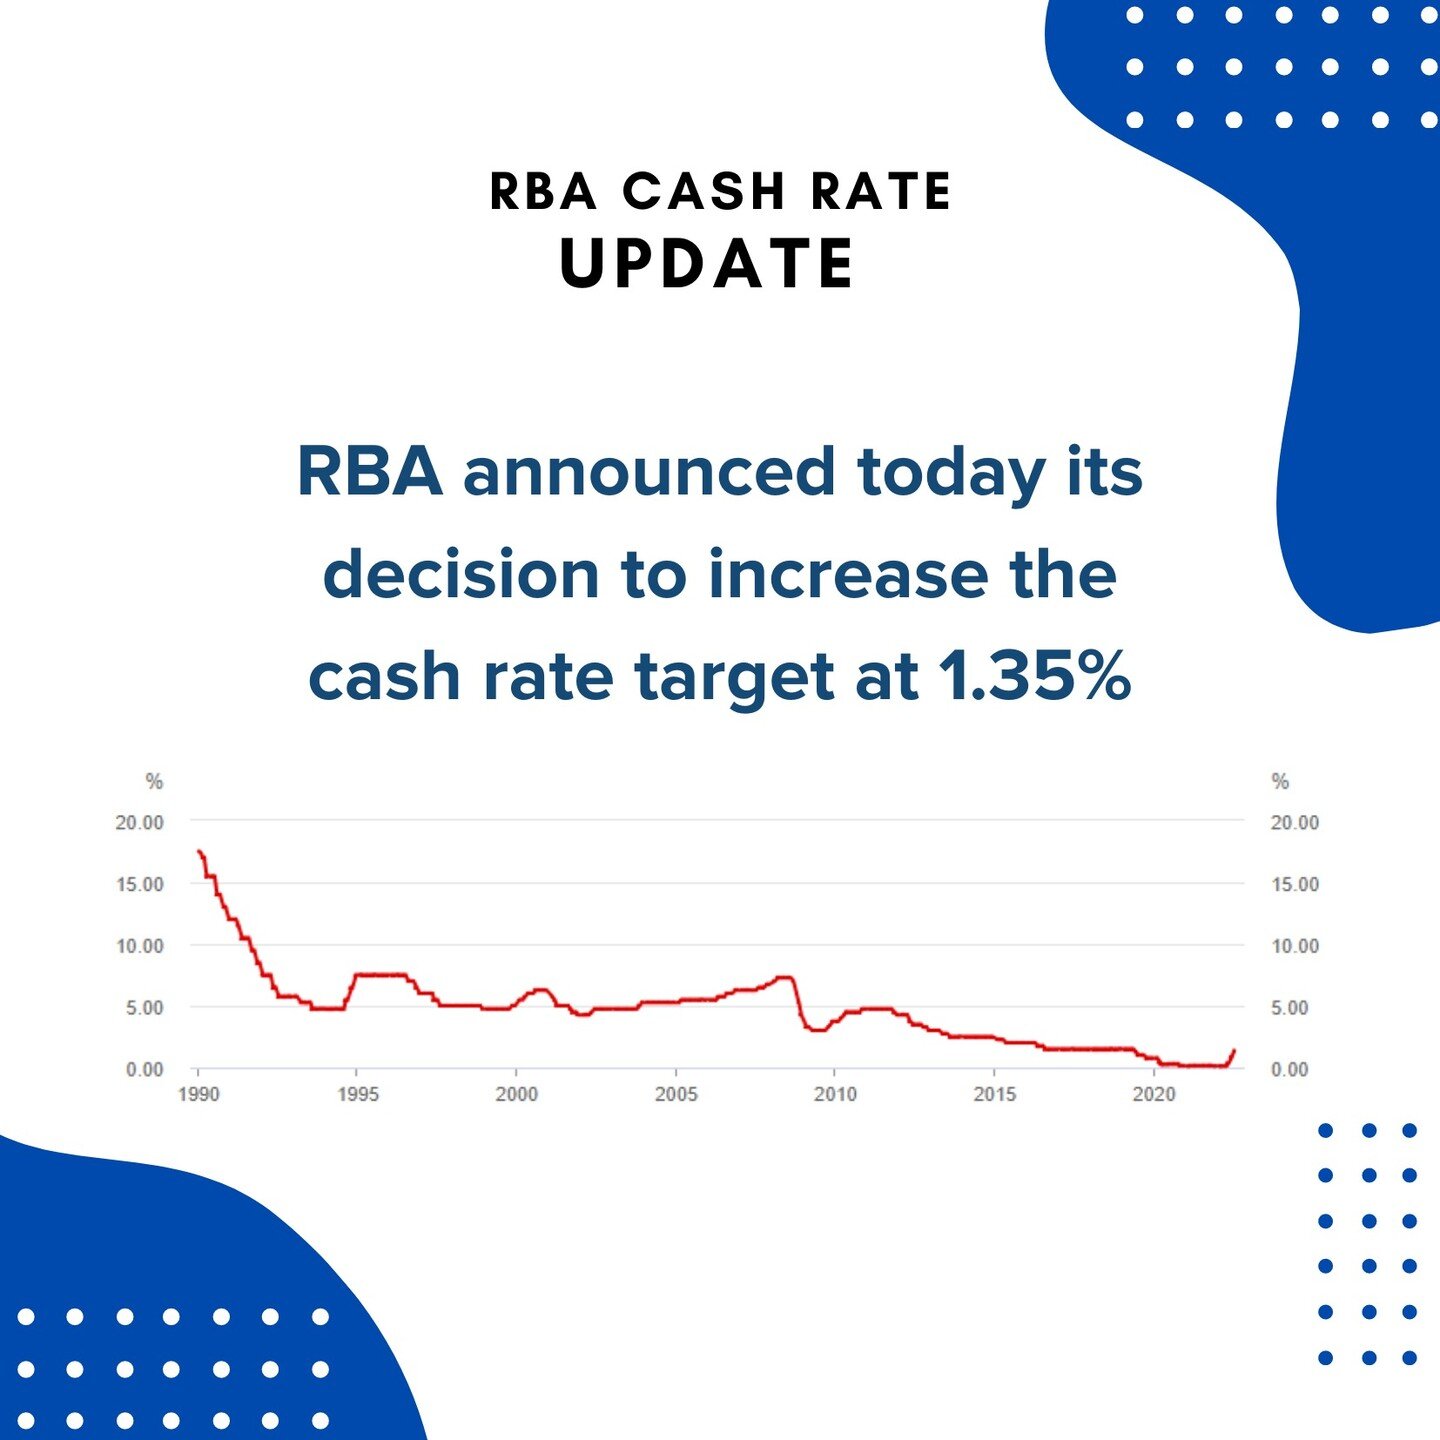 At its meeting today, RBA decided to increase the cash rate target at 1.35%

Planning your next move? We'd love to help!
#WynFinance #MortgageBrokers #Broker #Loans #HomeLoans #CommercialLoans #Investor #Homeowner #Properties #Bank #RealEstate #Austr